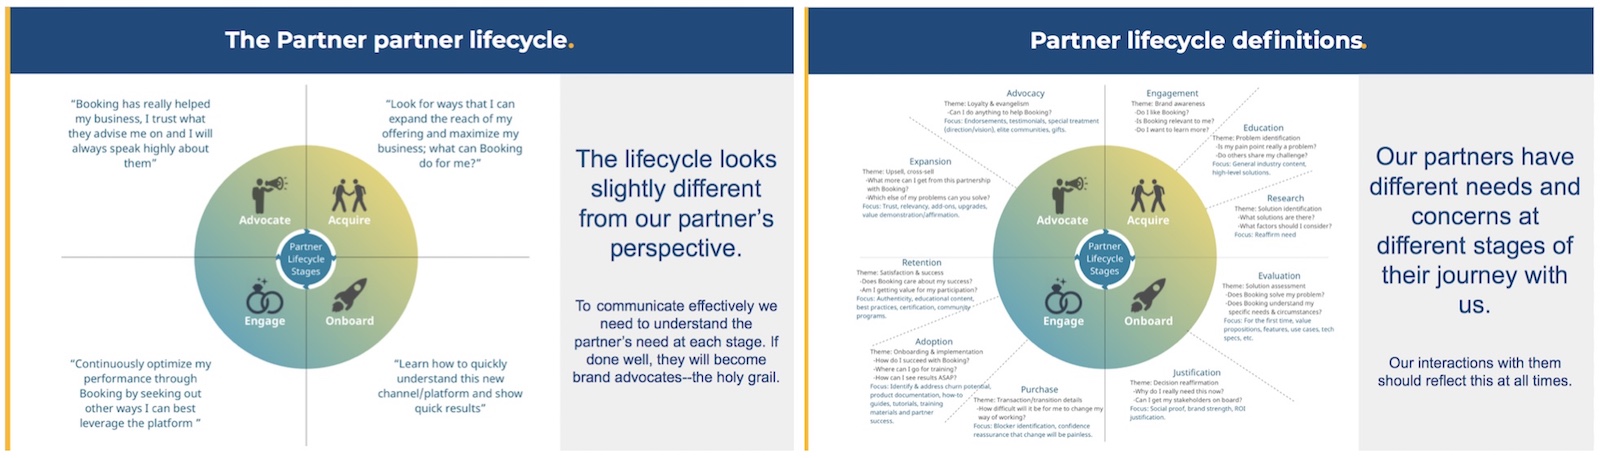 Partner-centric view of lifecycle